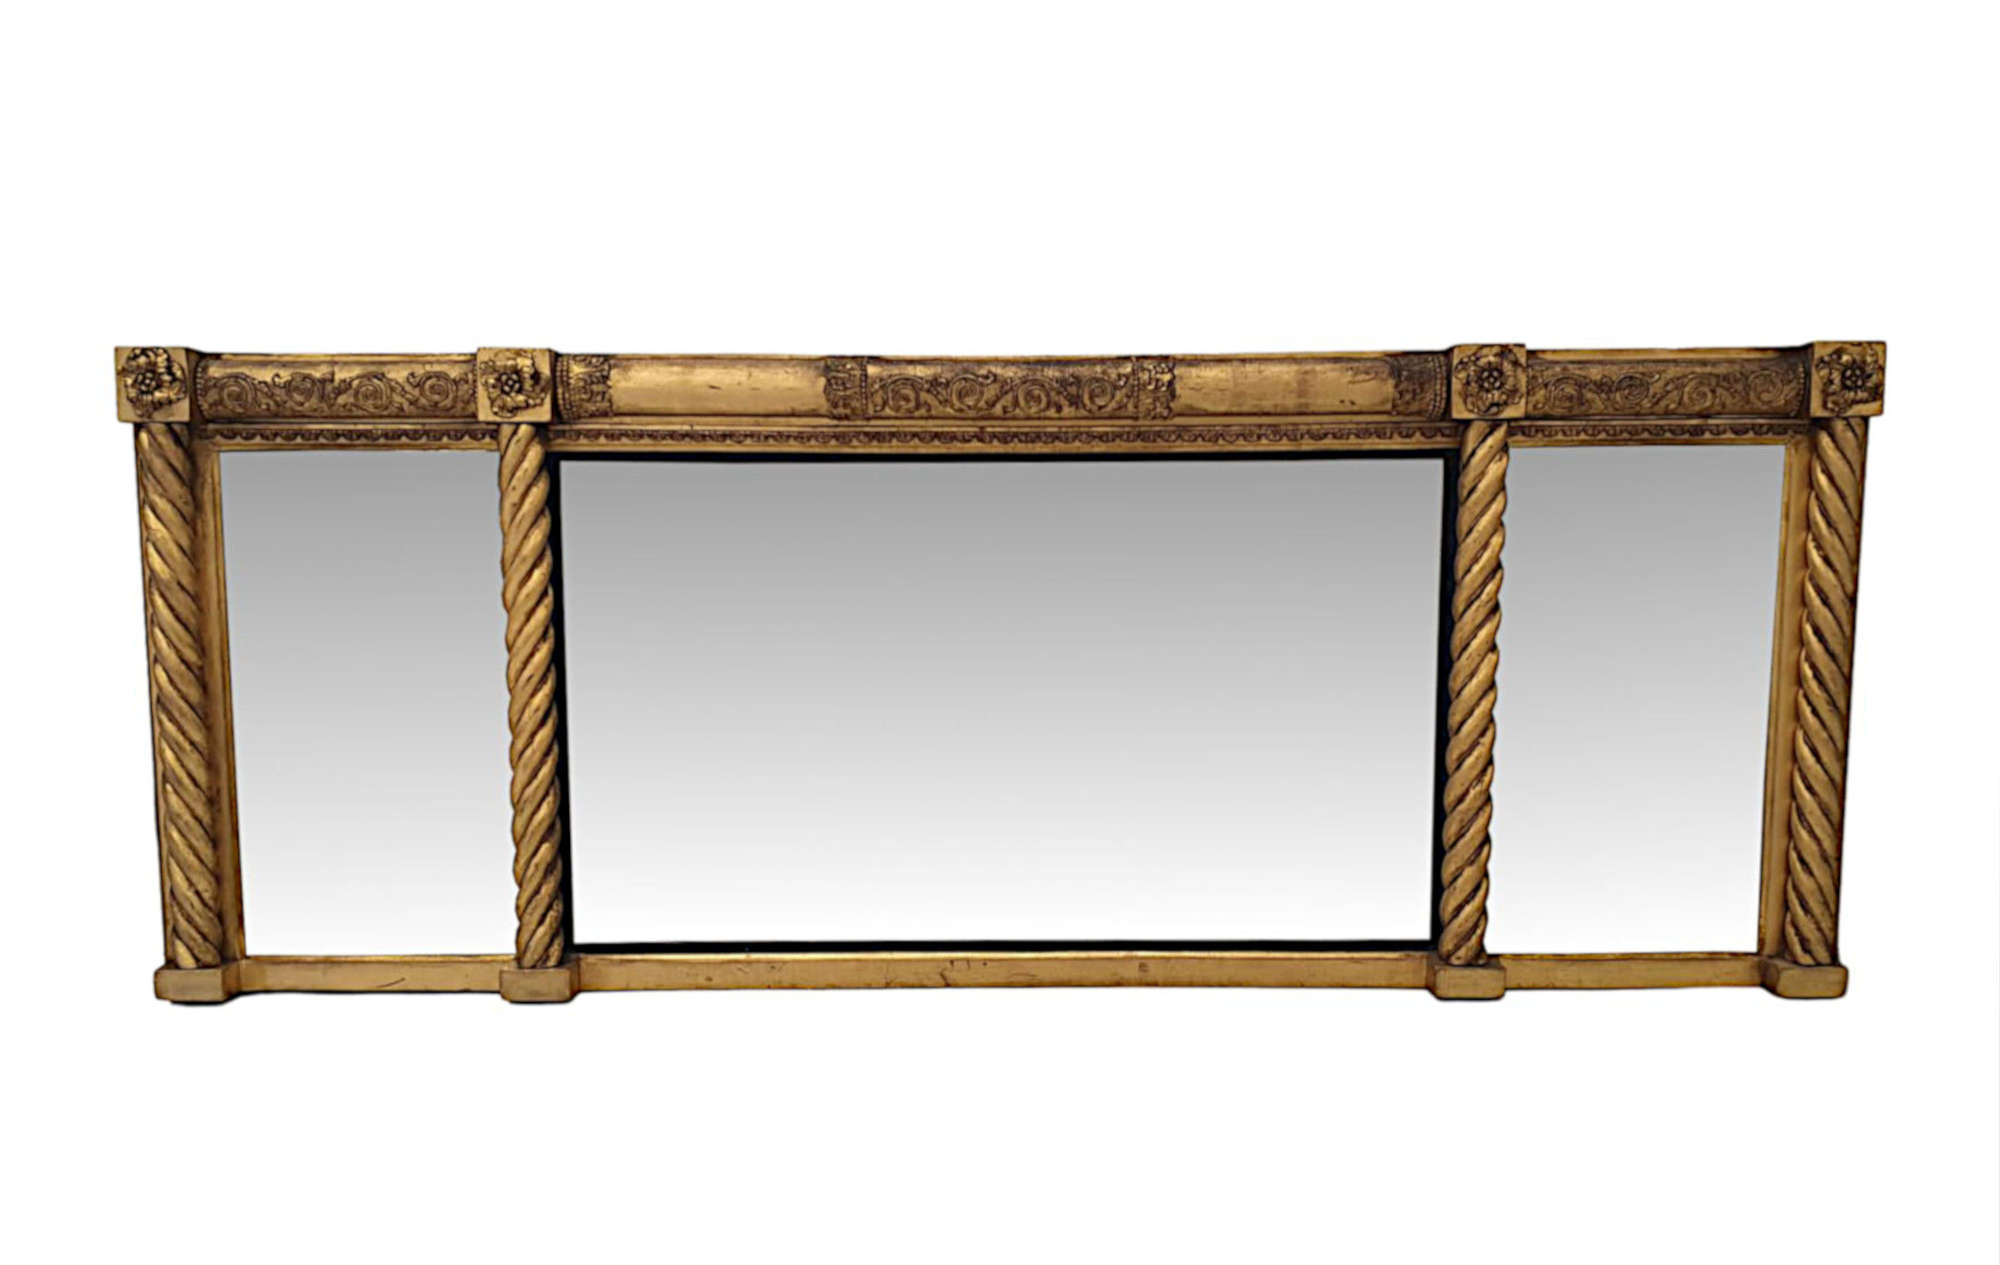 A Very Fine and Unusual 19th Century Three Panel Overmantle Giltwood Mirror